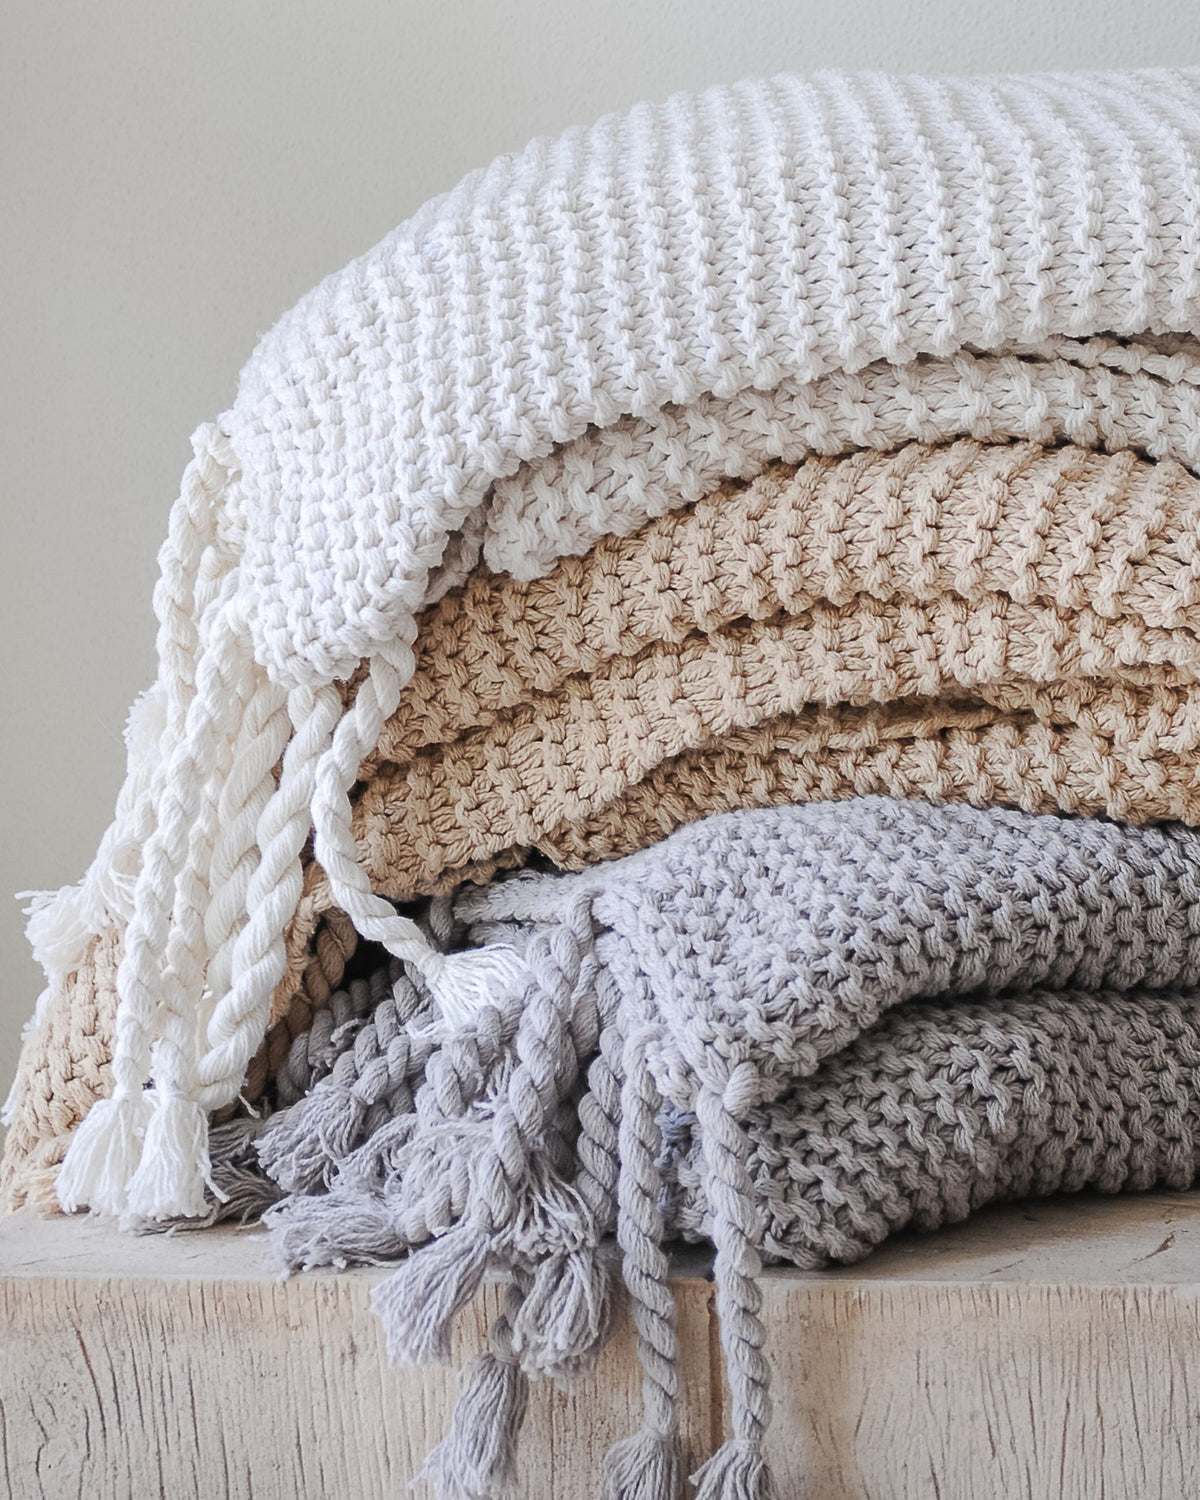 Organic Cotton Comfy Knit Throw shown in Soft White, Gray and Tan